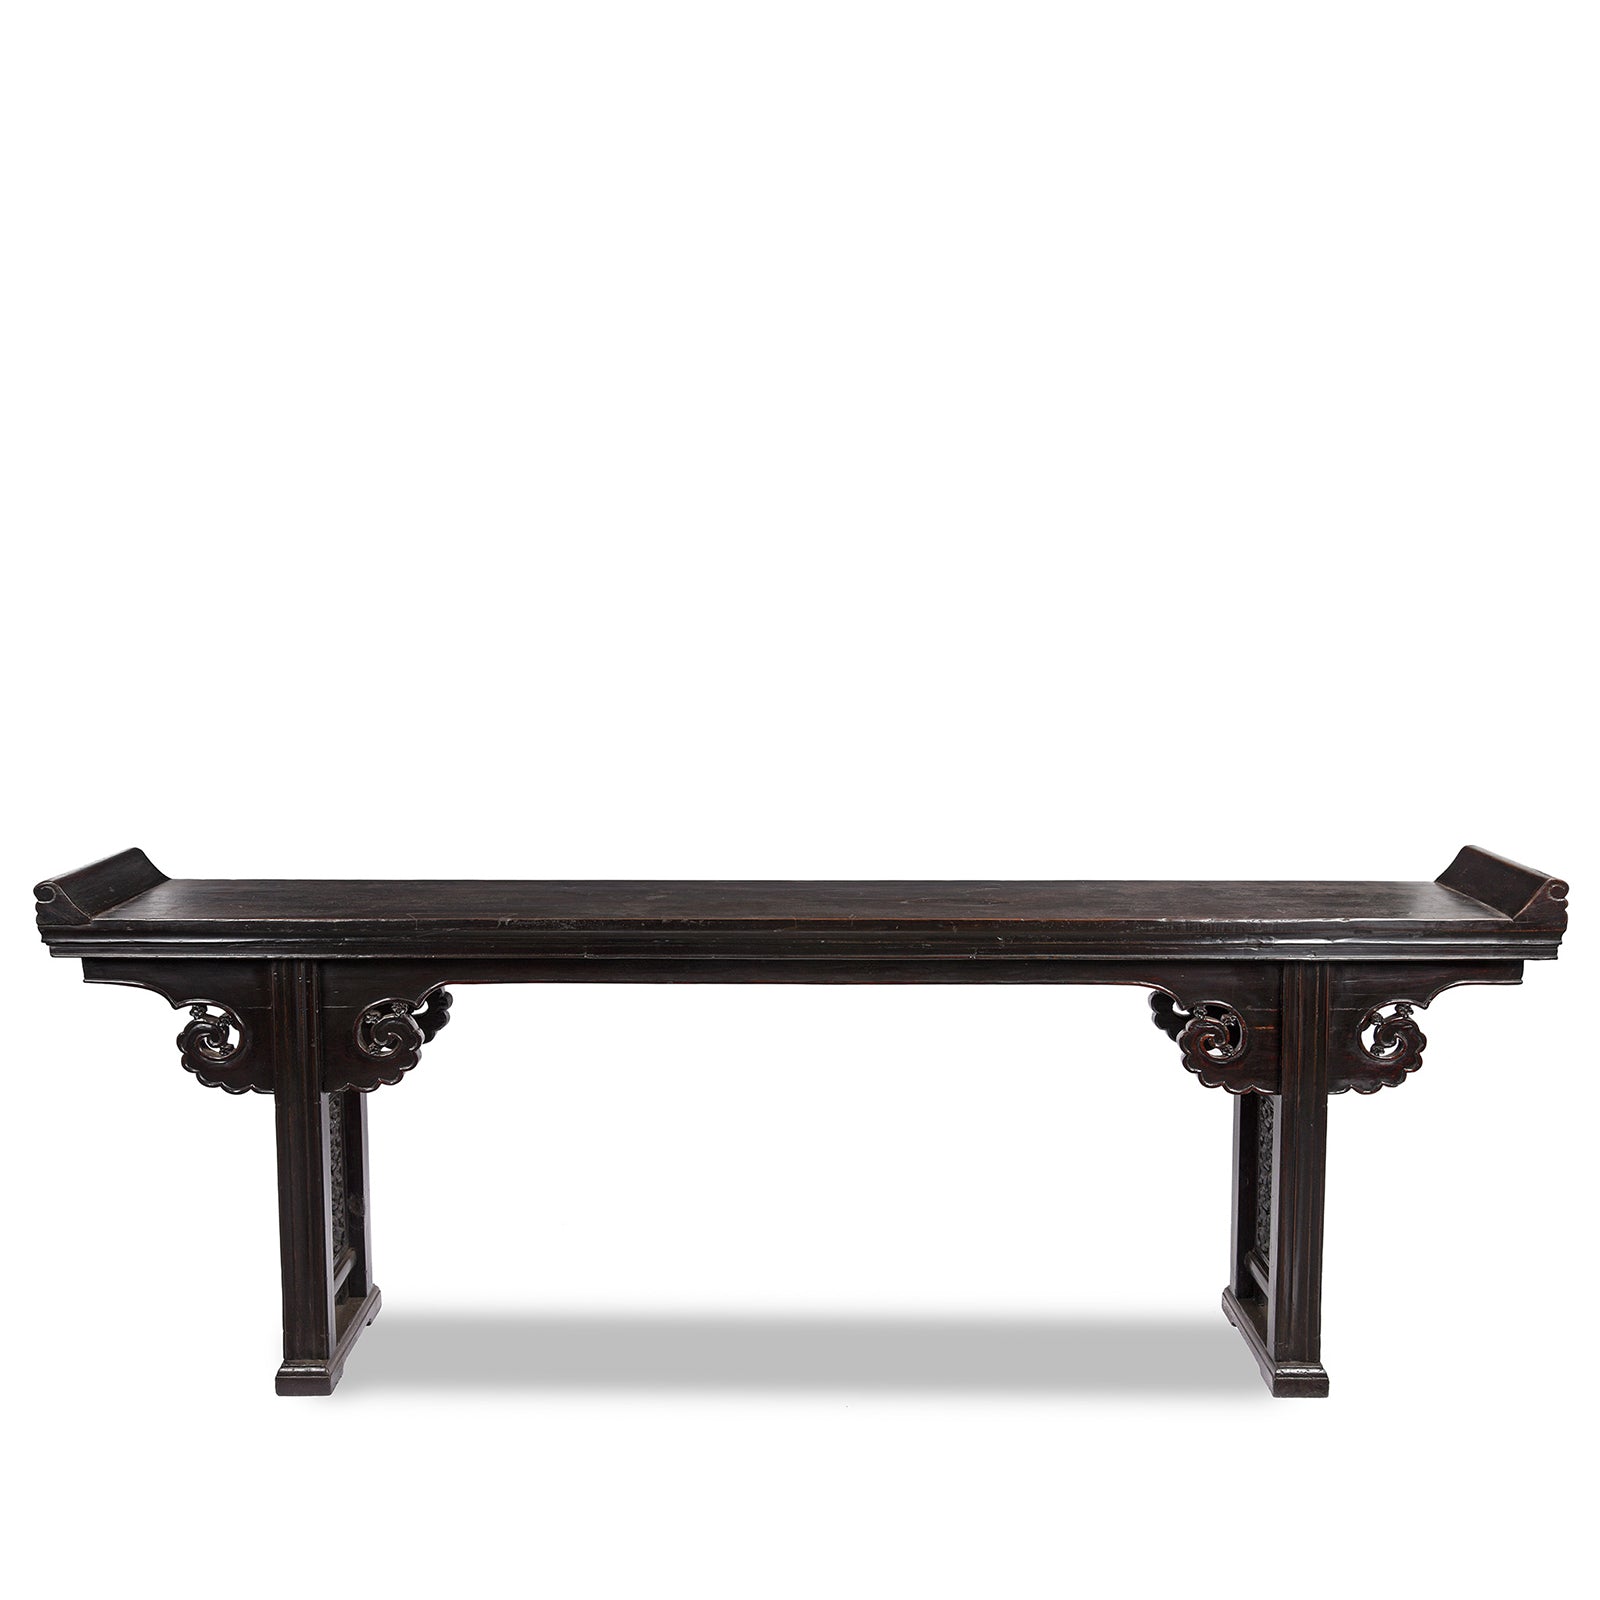 Black Lacquer Altar Table from Shanxi - Early 19thC | Indigo Antiques